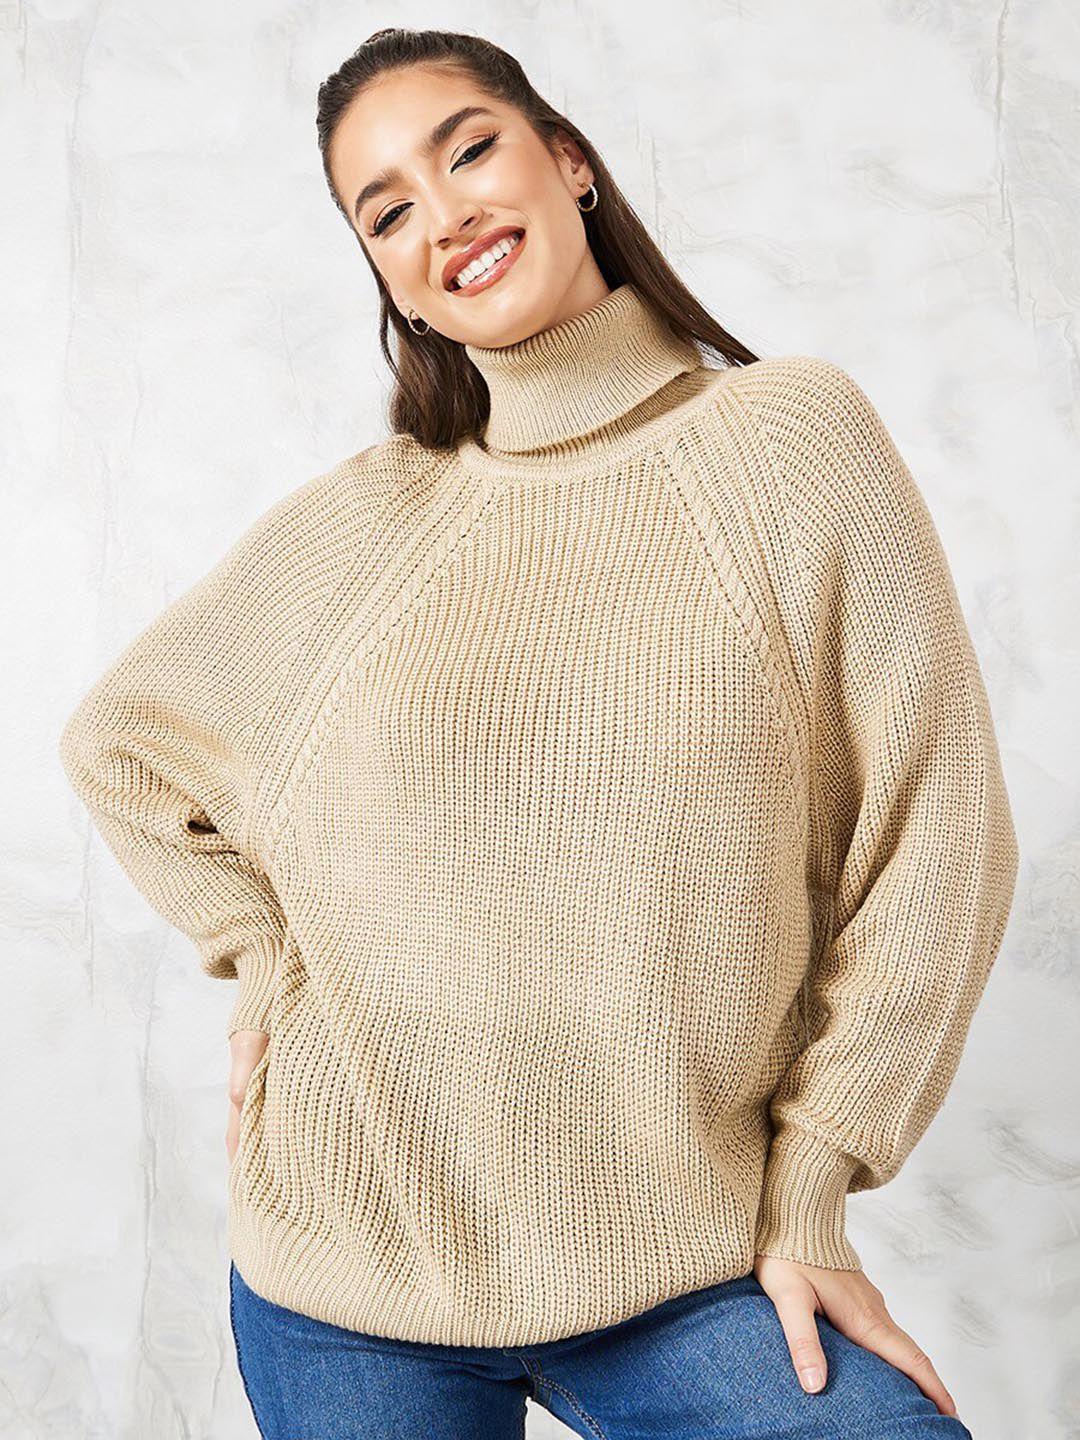 styli-beige-cable-knit-self-design-turtle-neck-acrylic-pullover-sweater